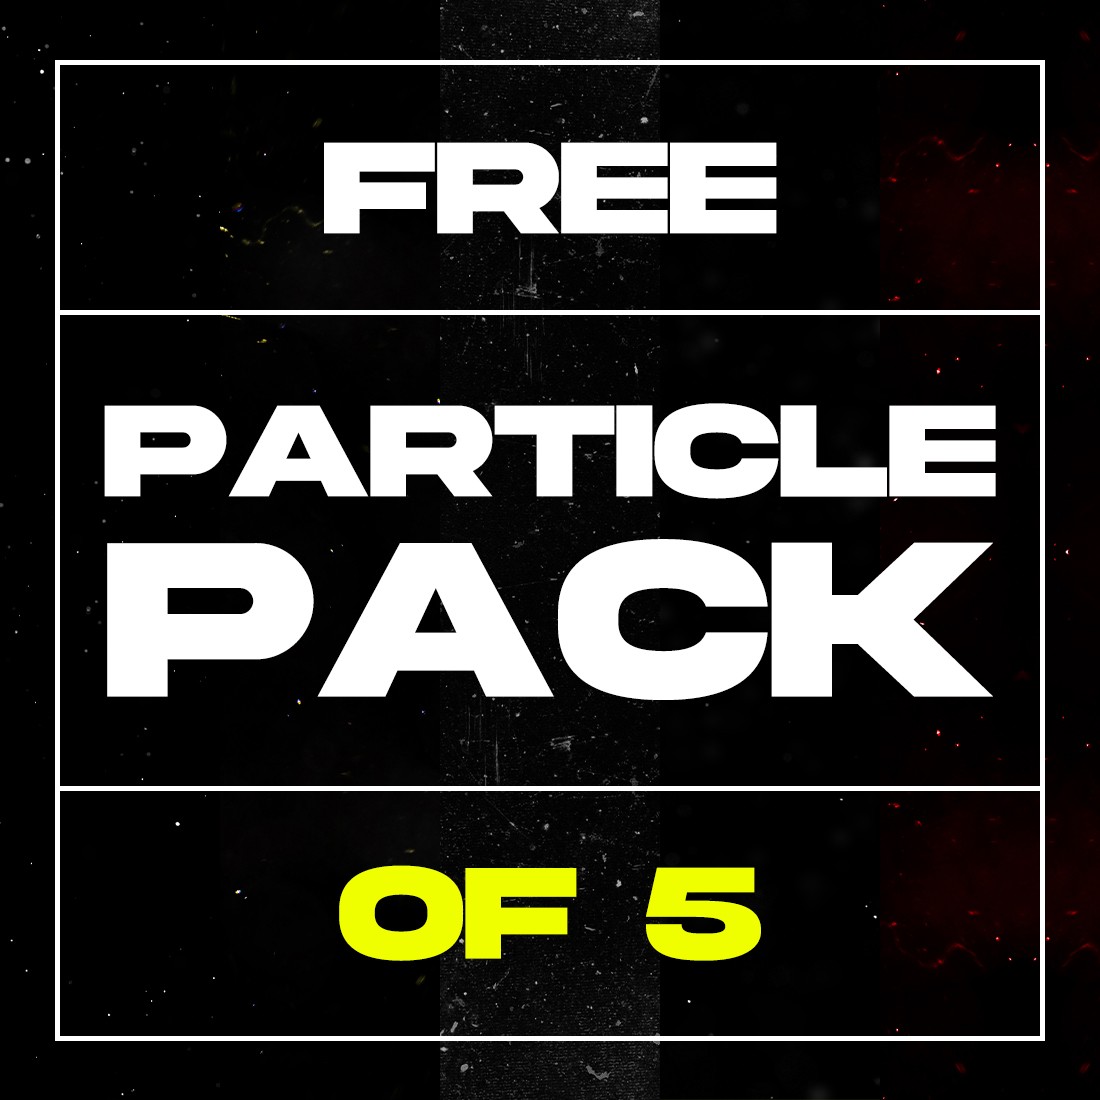 Particle Pack Dust - Free Resources Art cover image.